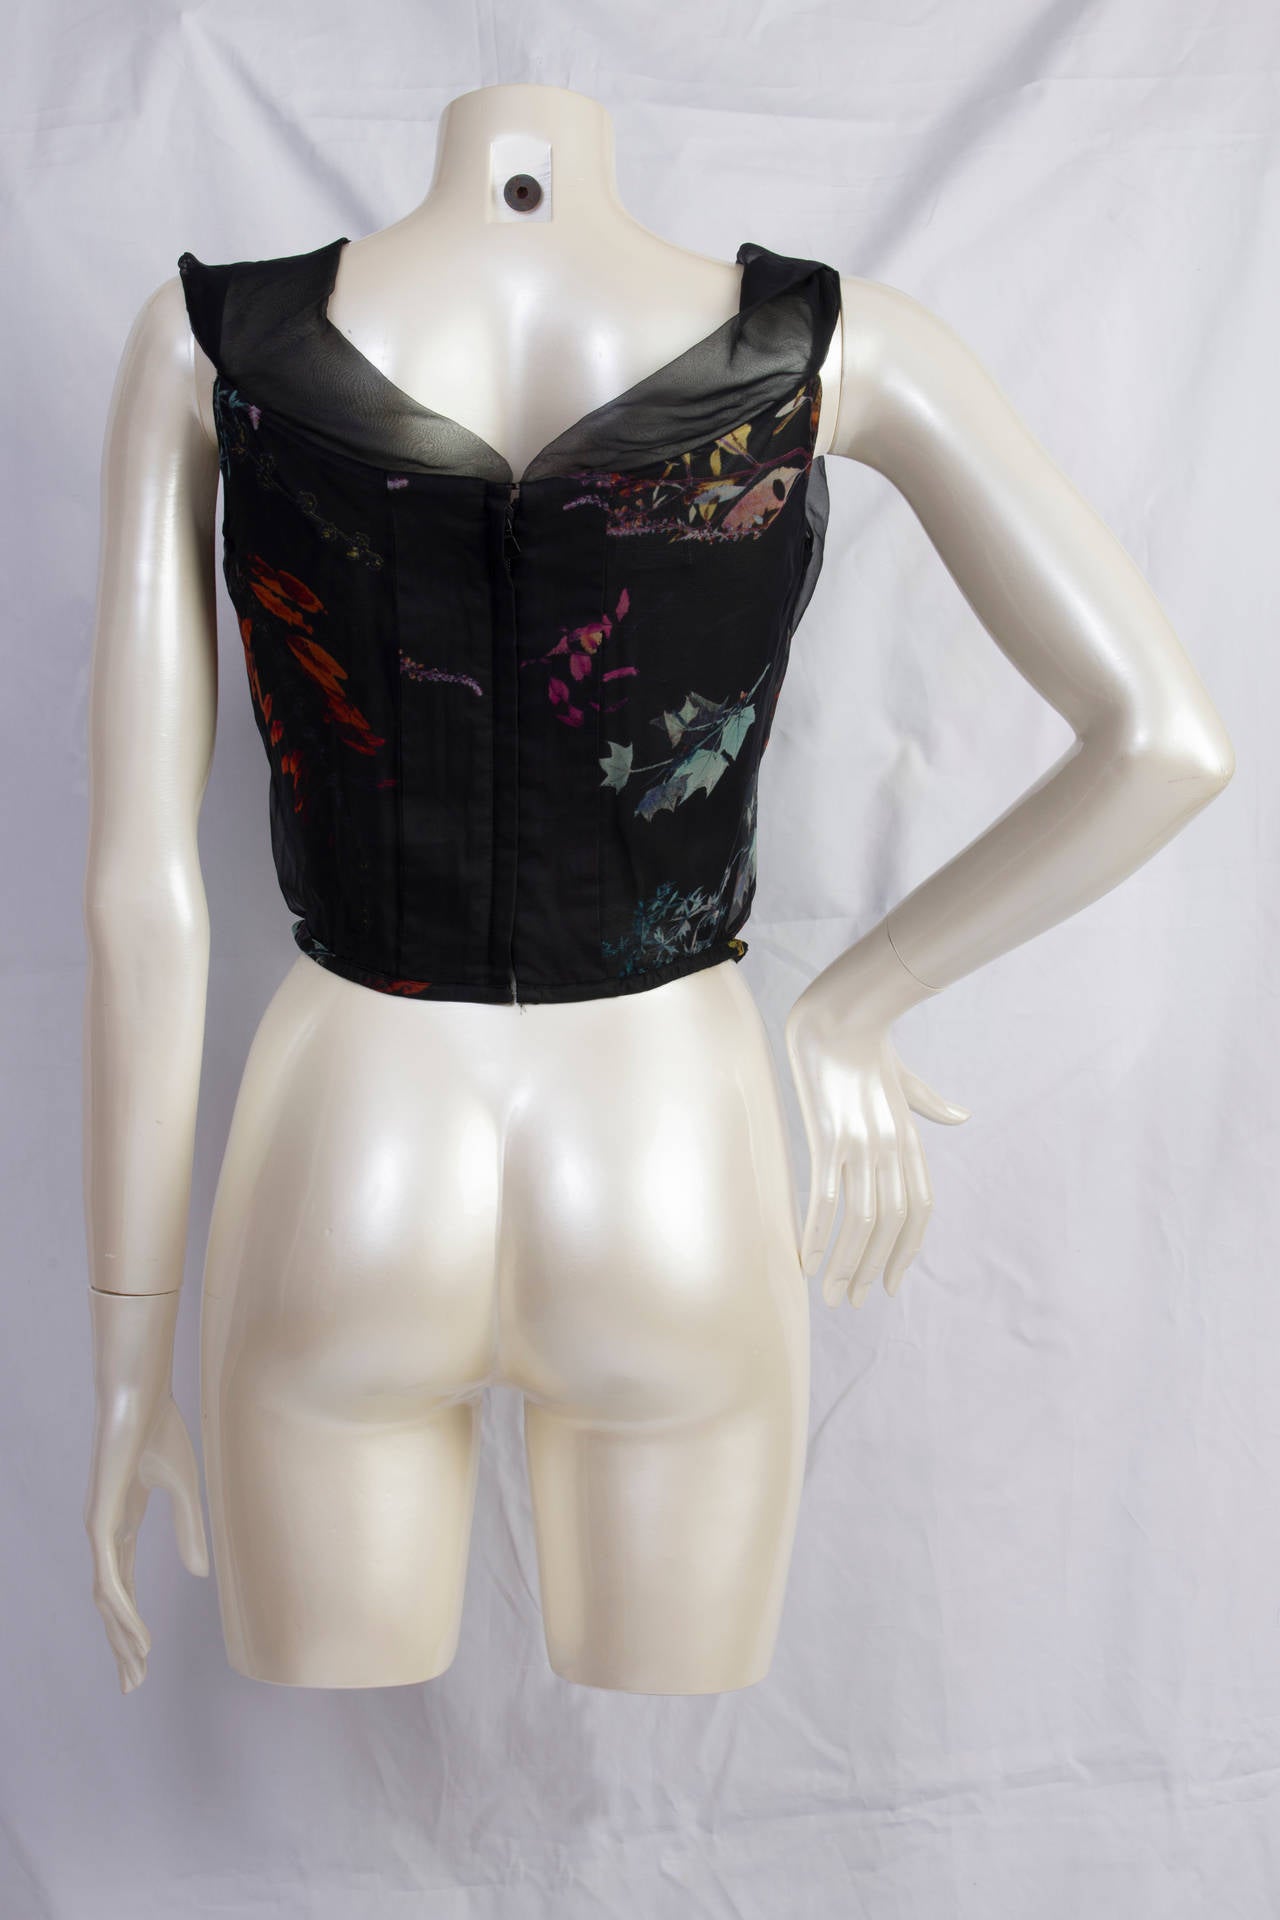 2000s Vivienne Westwood Red Label flowered corset still with tags.